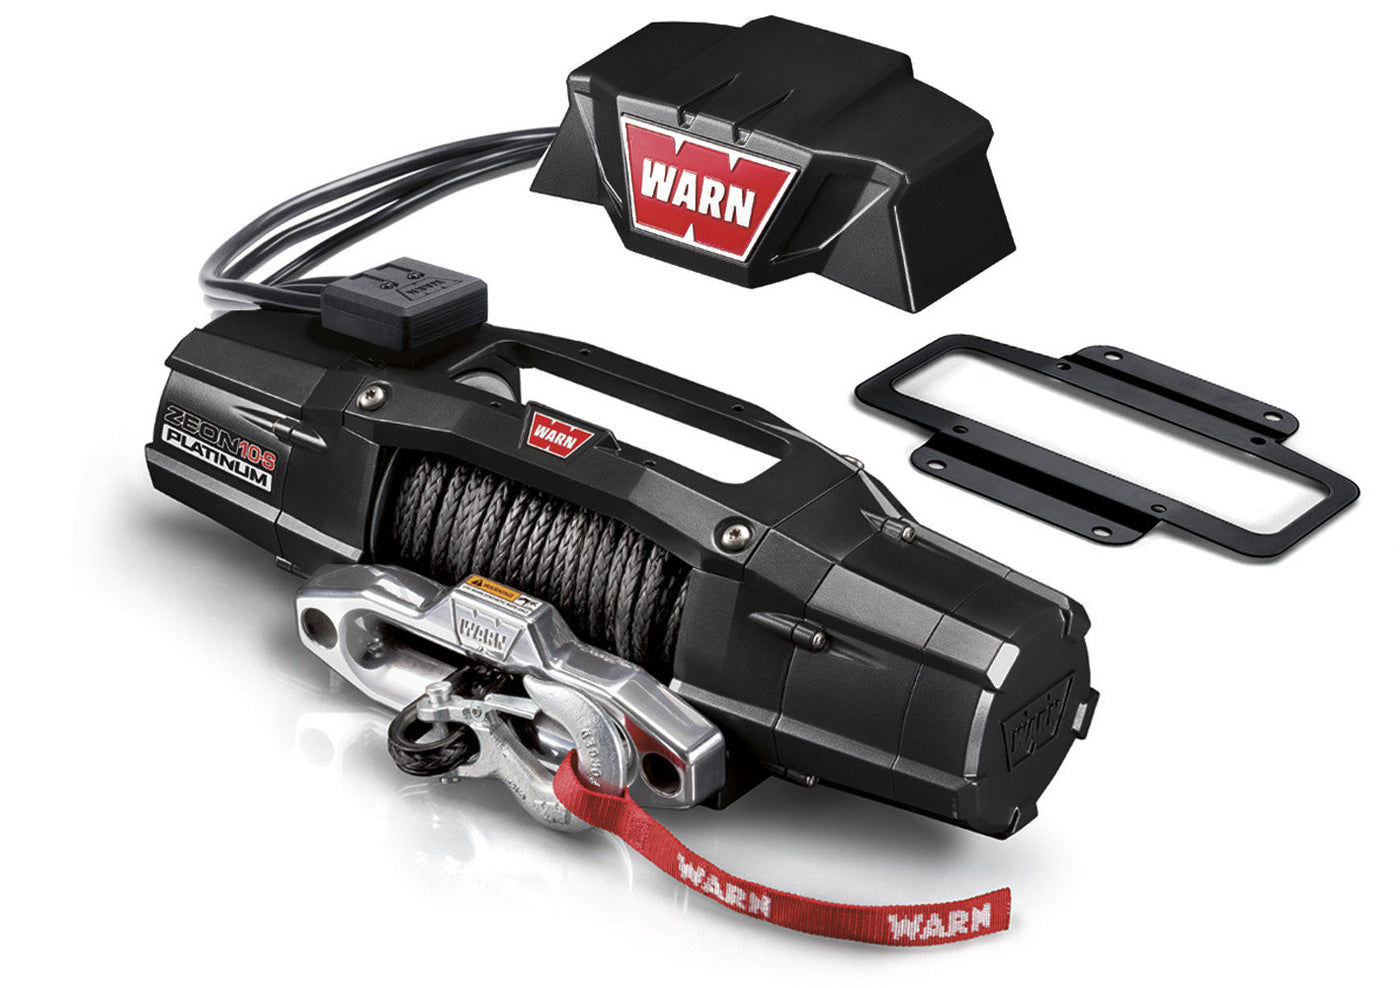 WARN ZEON 10-S Platinum Winch with Synthetic Rope and Bluetooth Controller